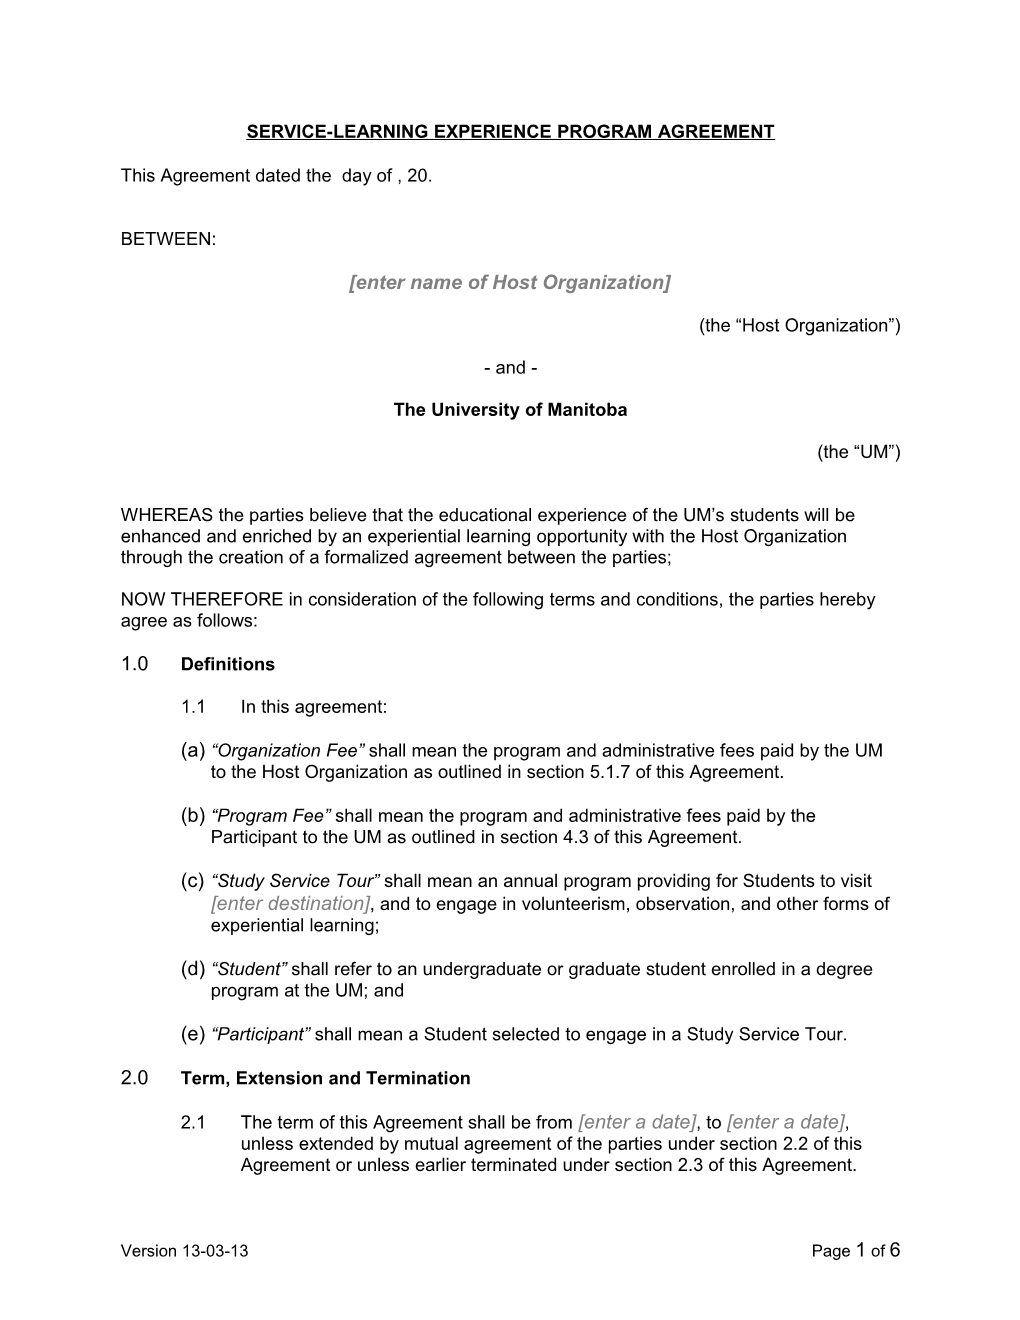 Service-Learning Experience Program Agreement